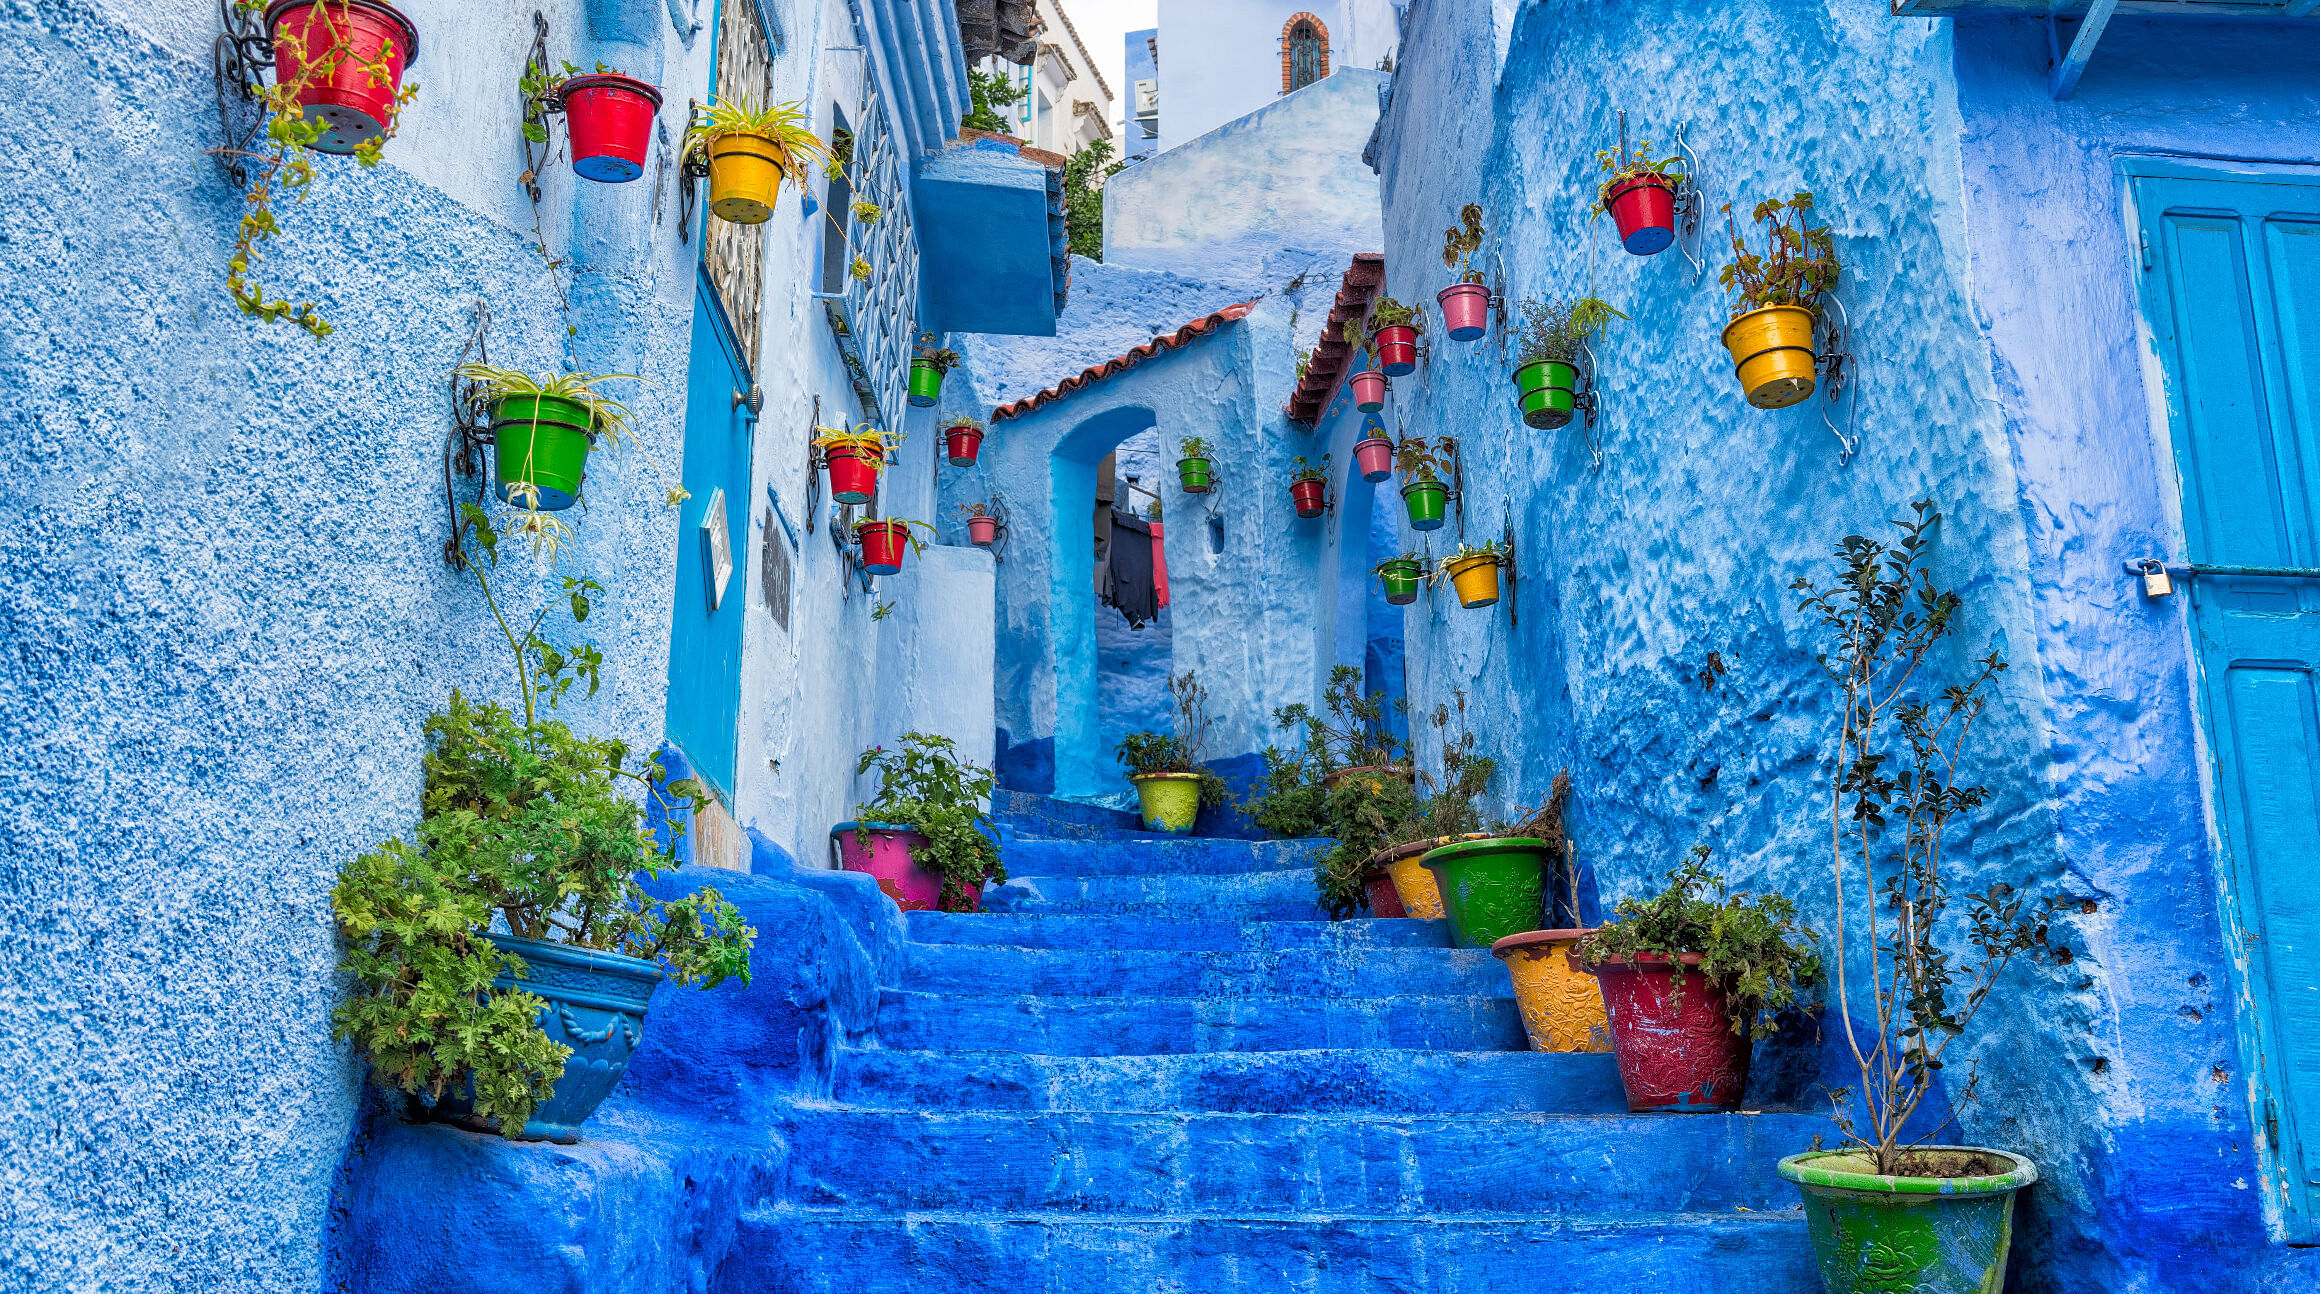 Blue street in Chefchaouen, Morocco